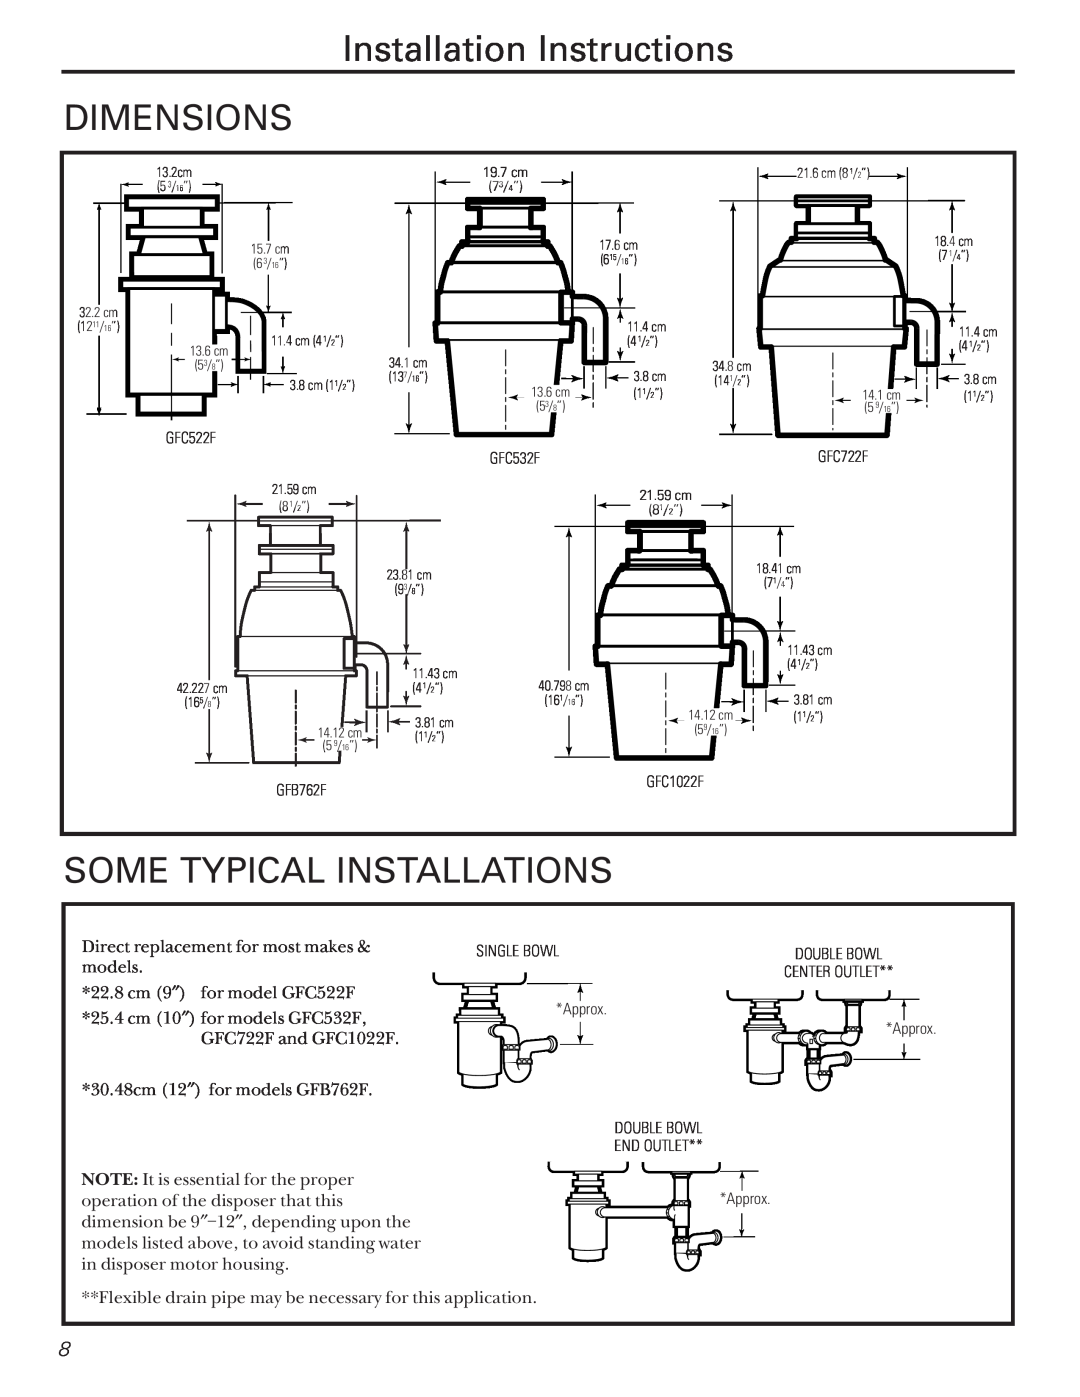 Camco GFC500F, GFC700F, GFB762F, GFC1022F owner manual Installation Instructions DIMENSIONS, Some Typical Installations 